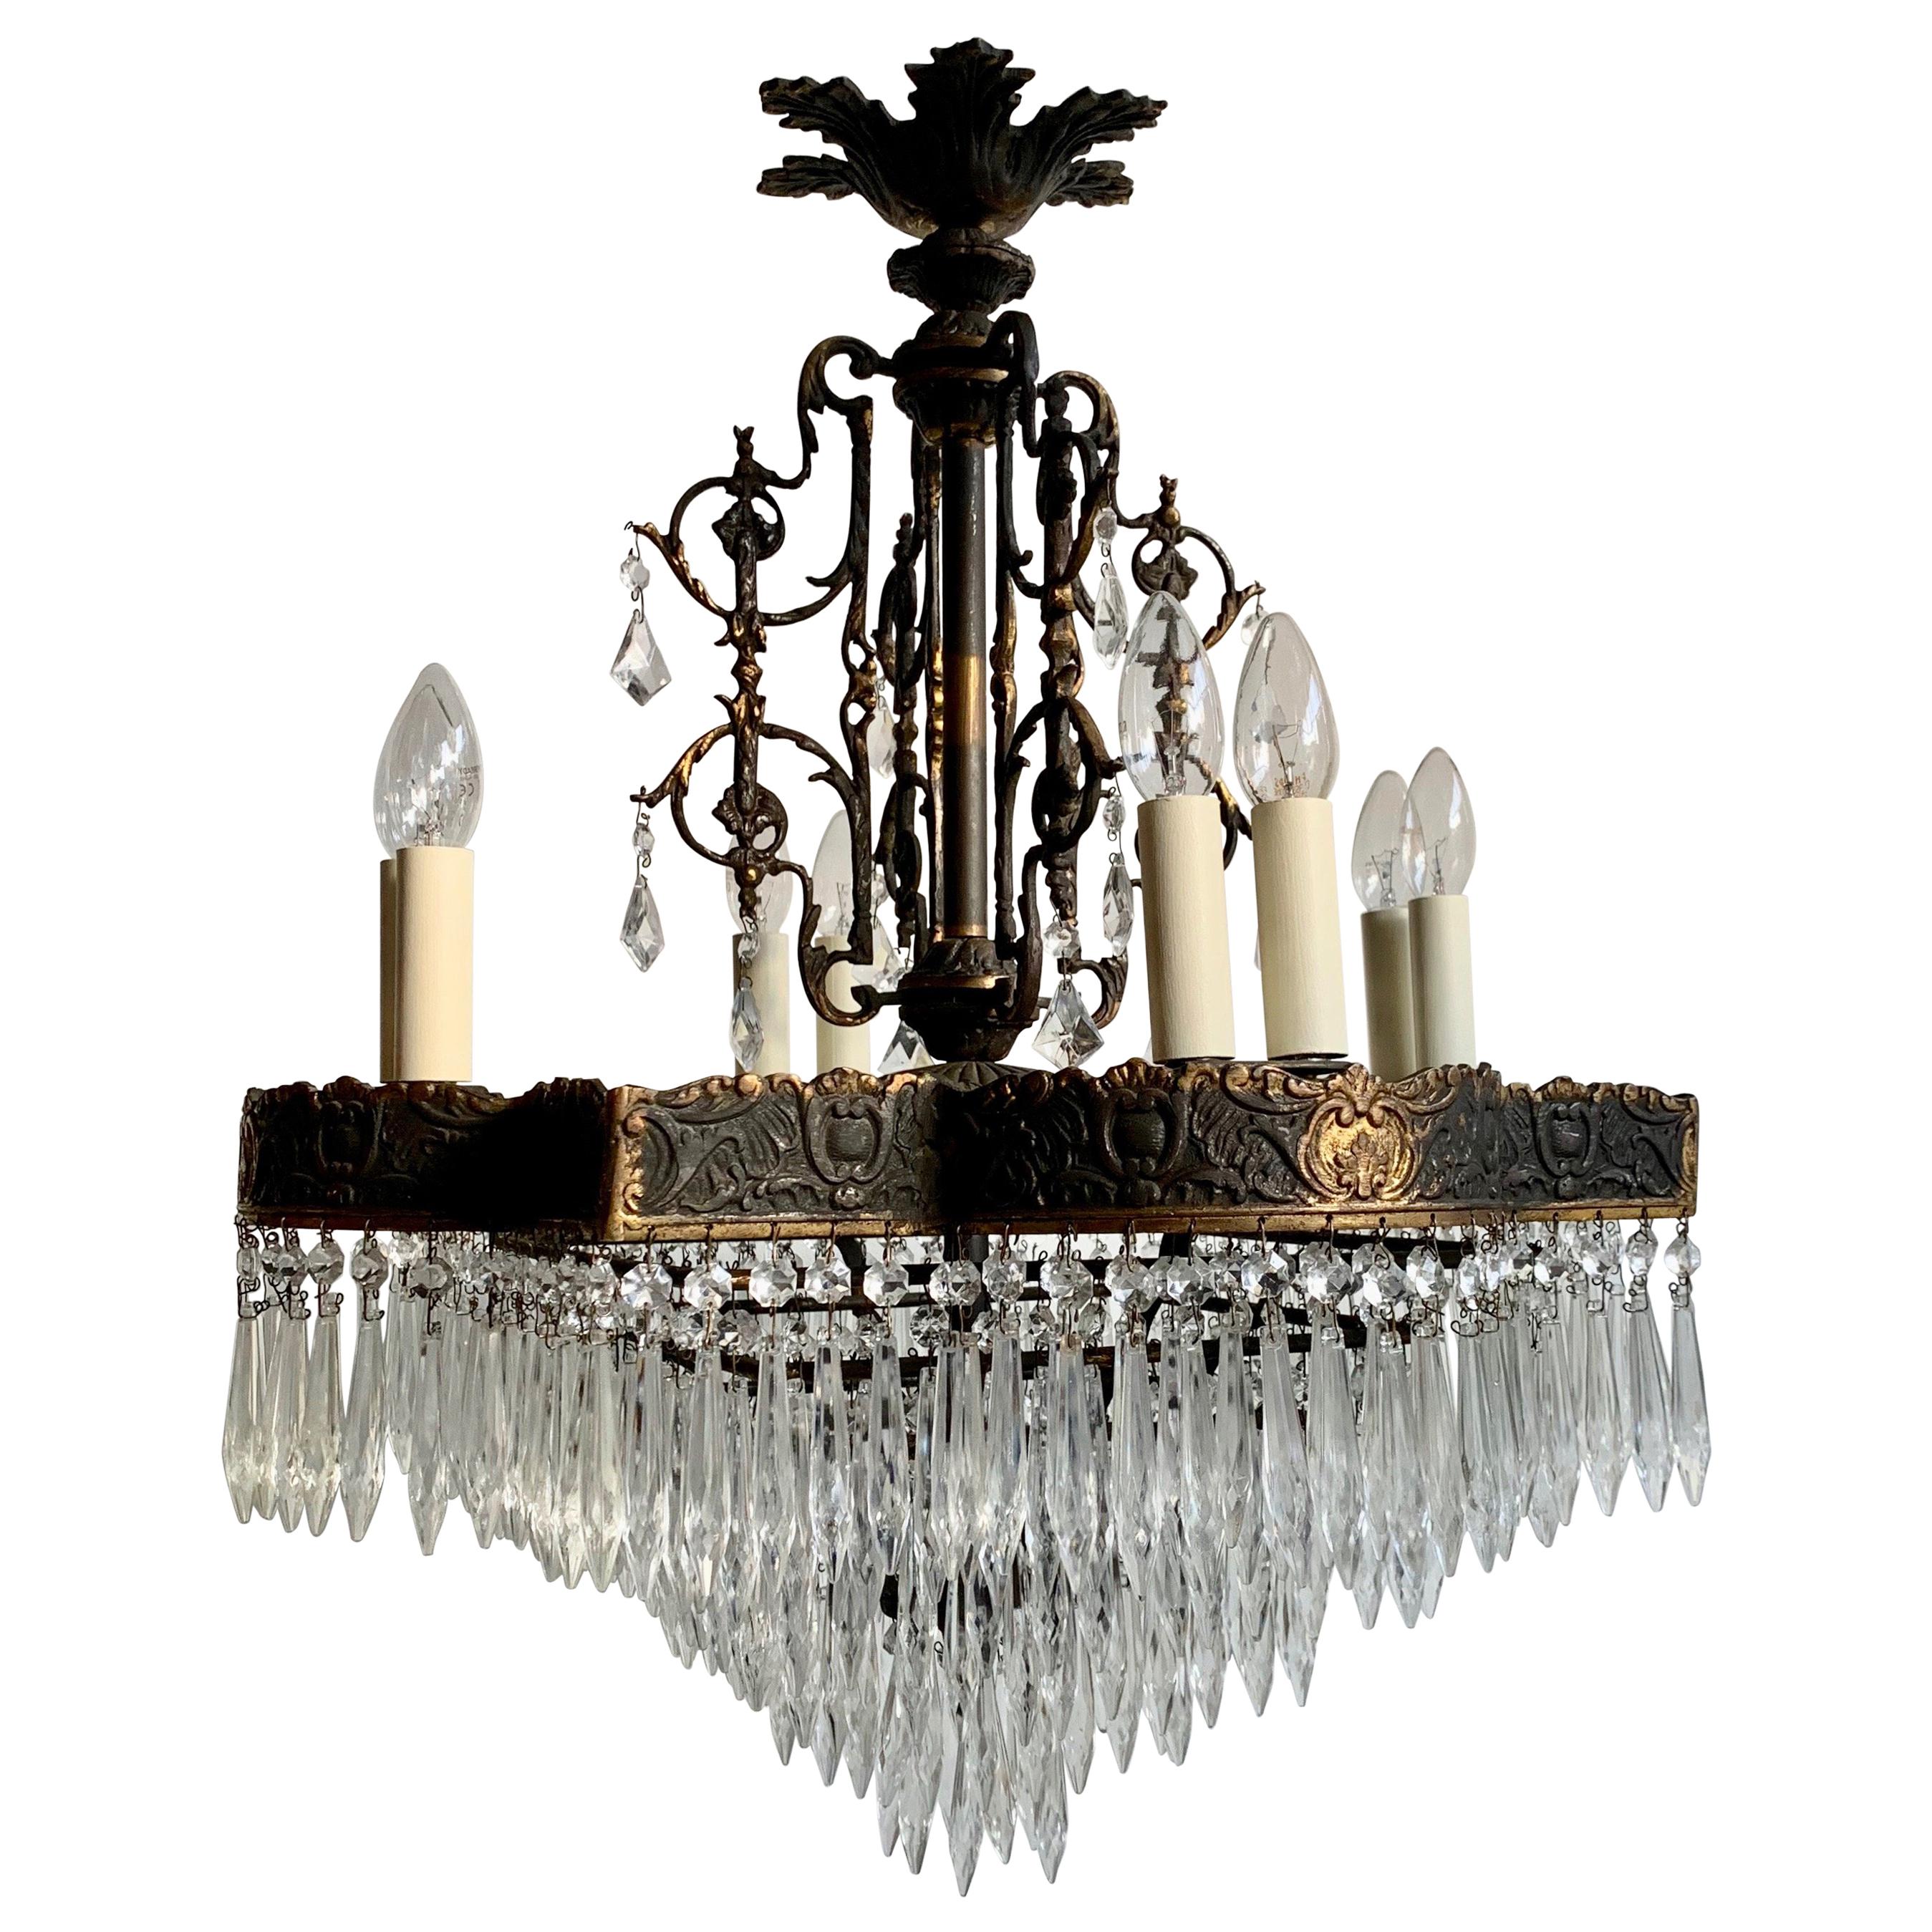 Large French Square French Tiered Waterfall Chandelier with Glass Icicle Drops